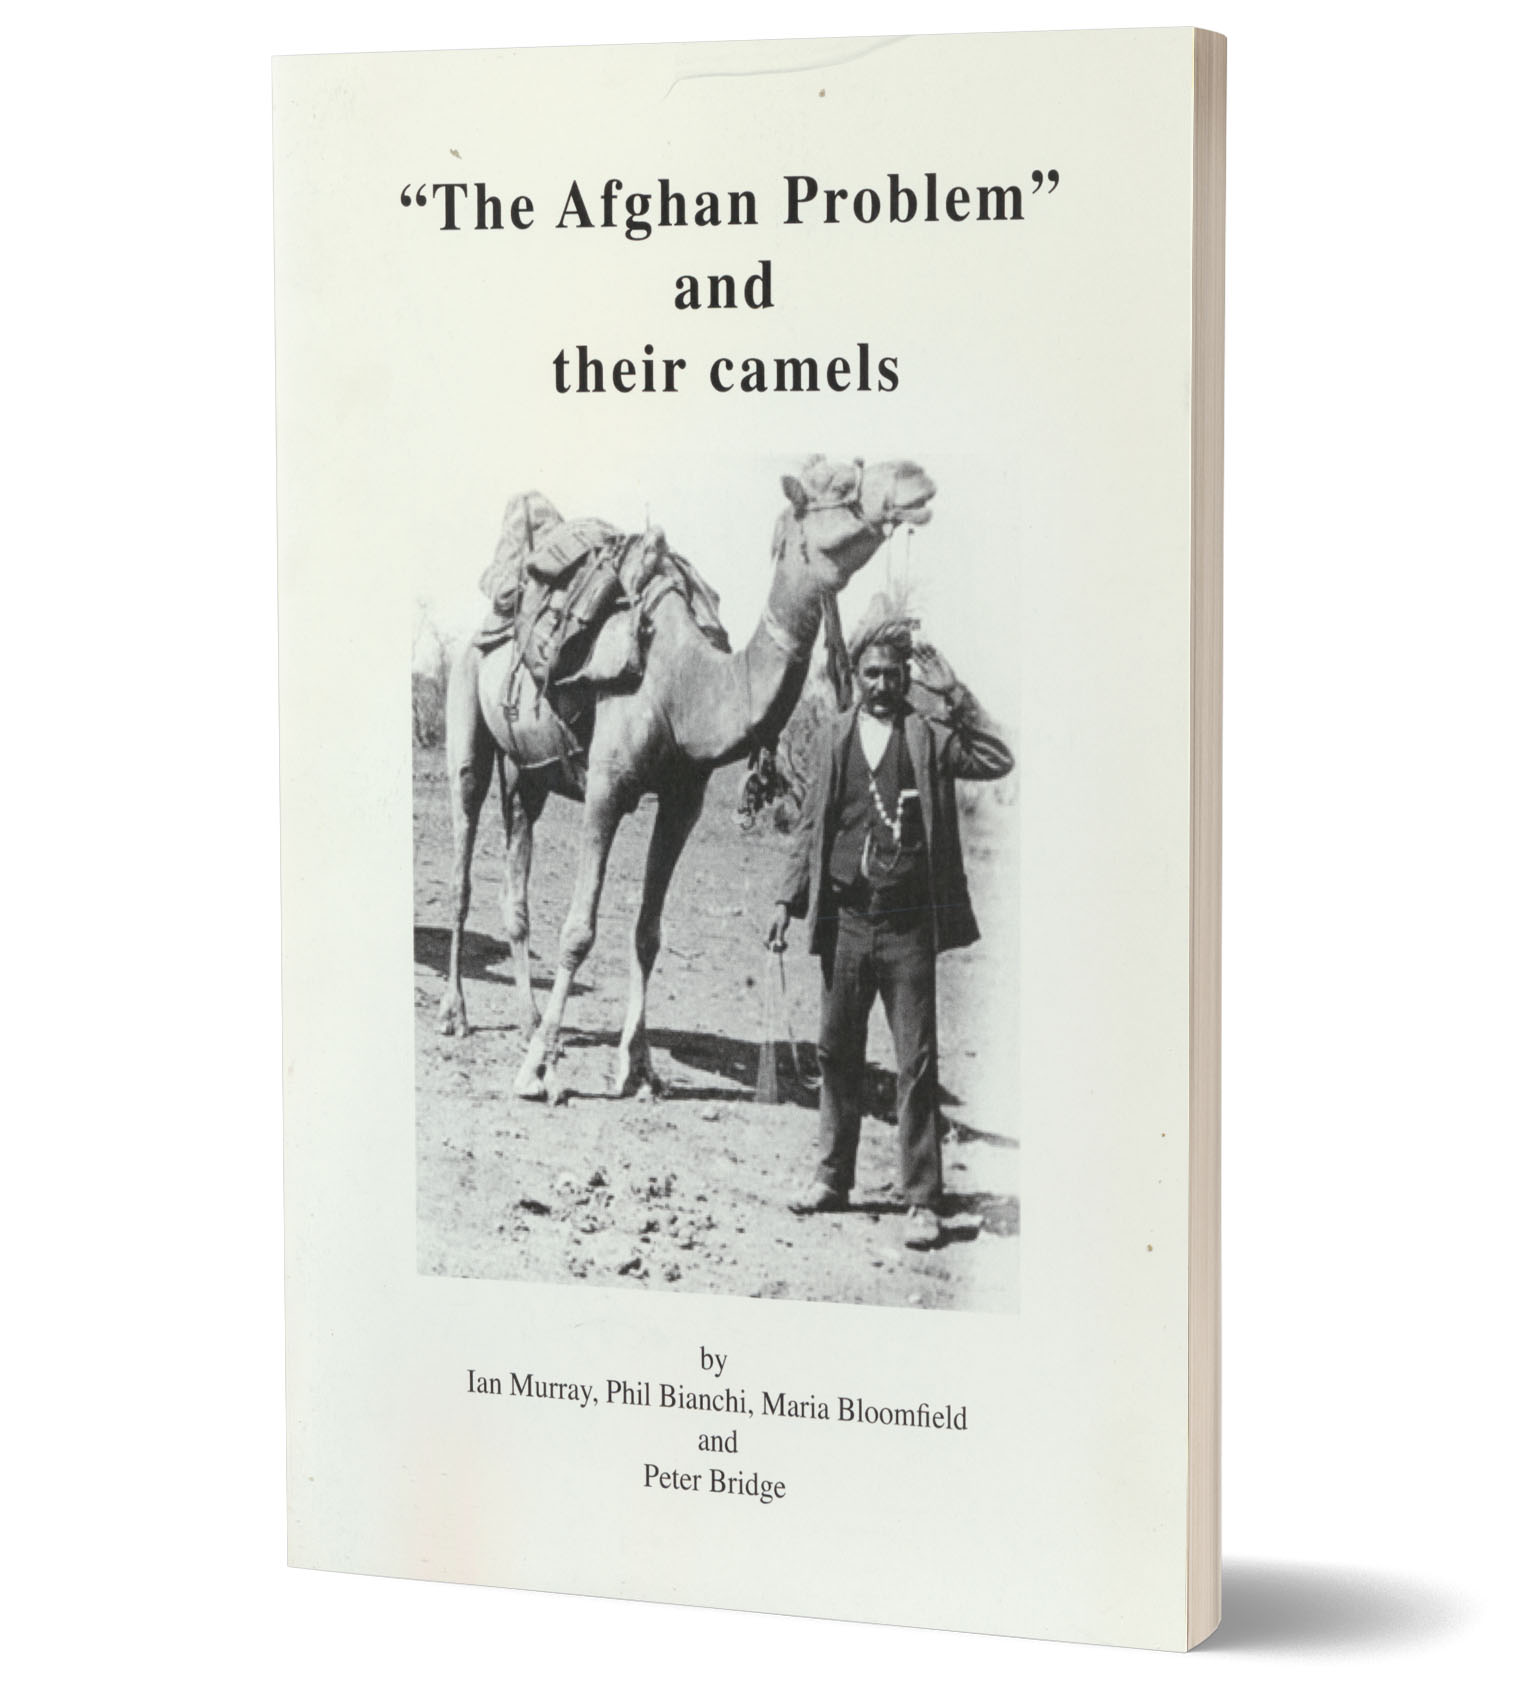 â€˜The Afghan Problemâ€™ and their camels